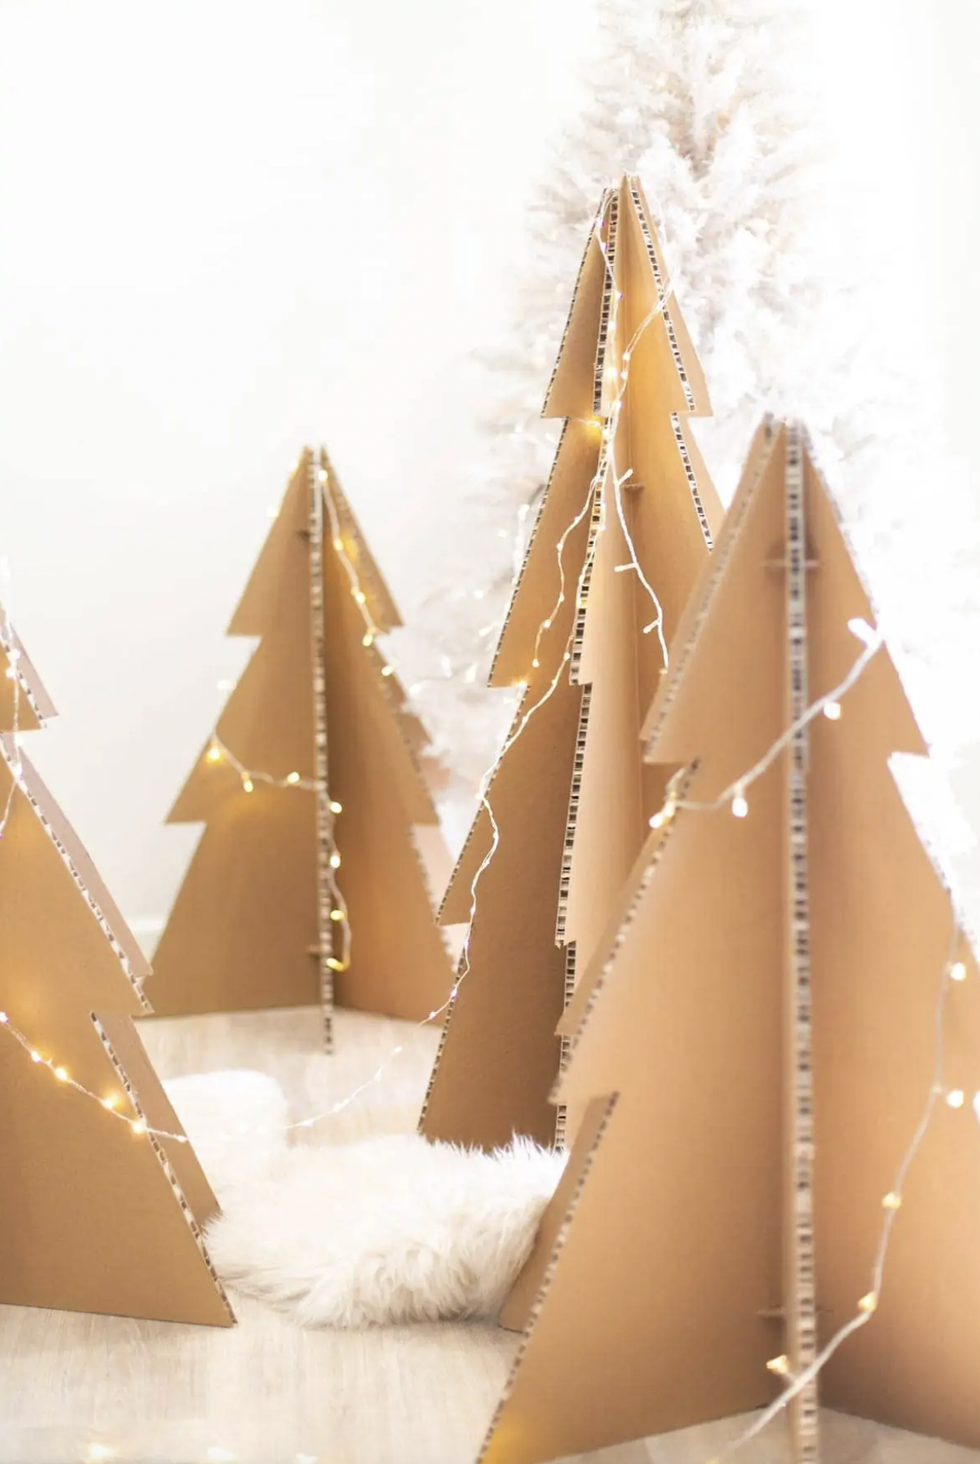 rustic Christmas decorations - Cardboard Christmas Trees: Whimsical Recycling